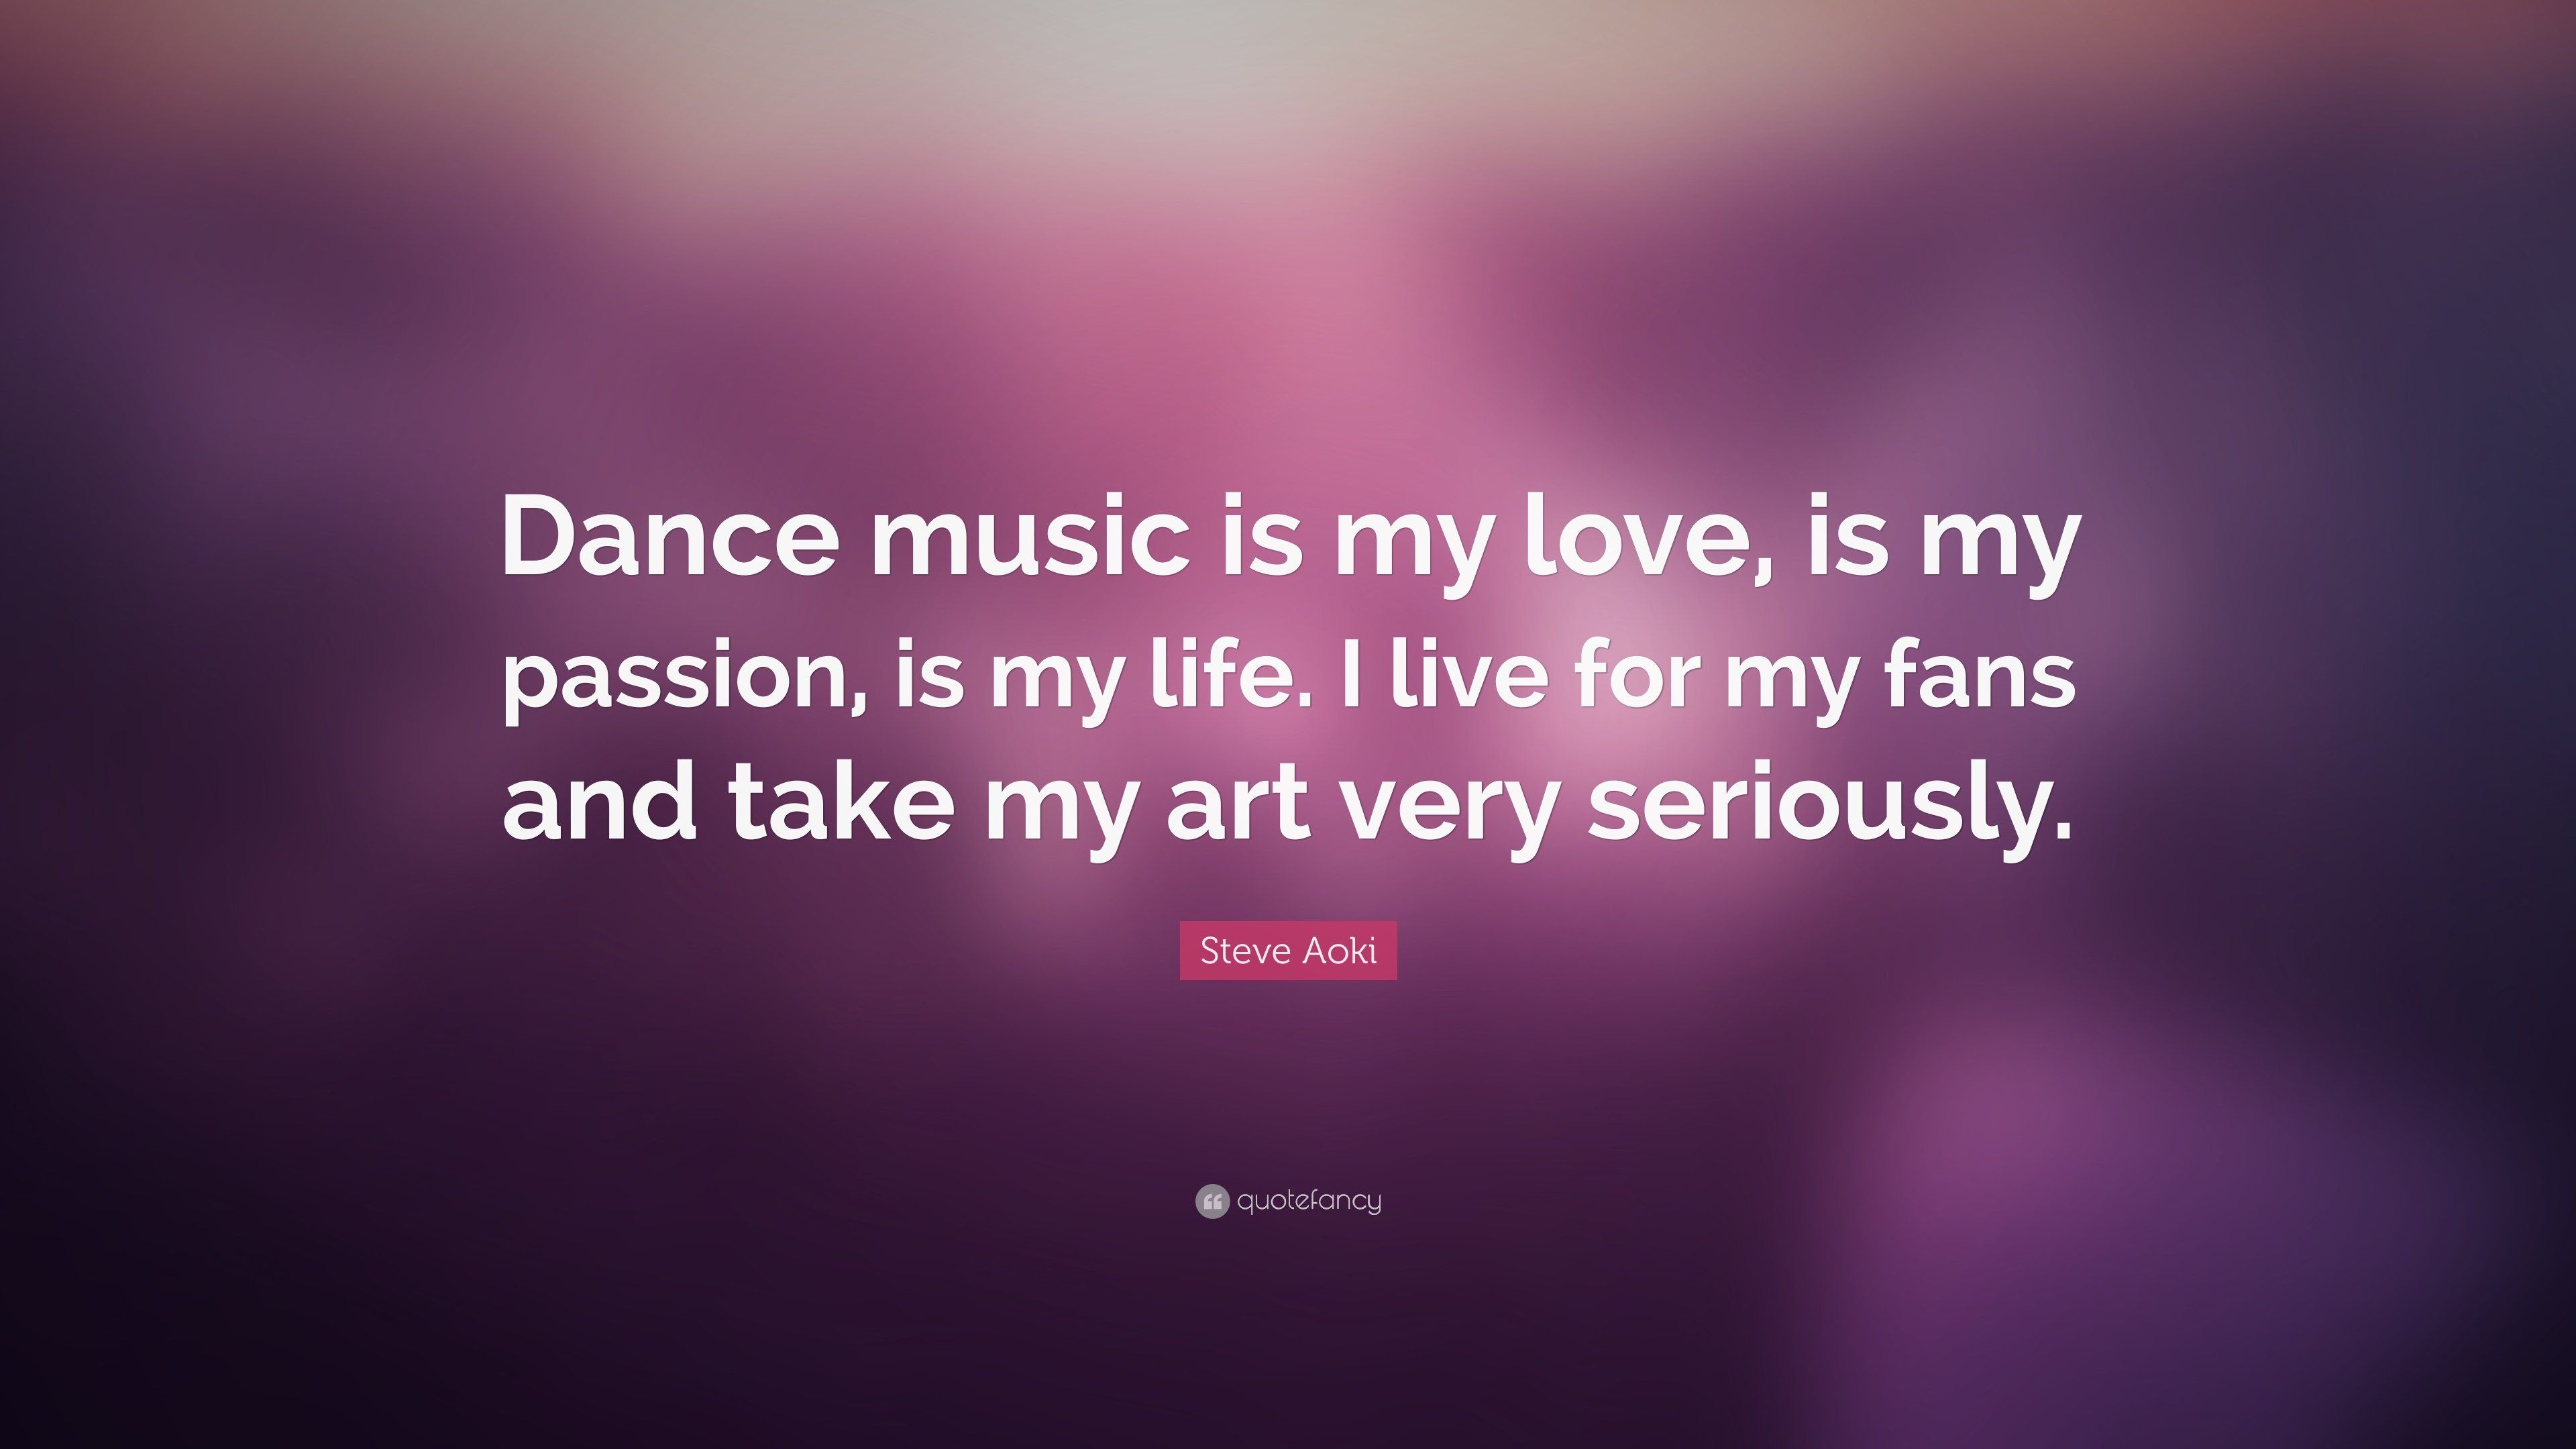 Music is my passion